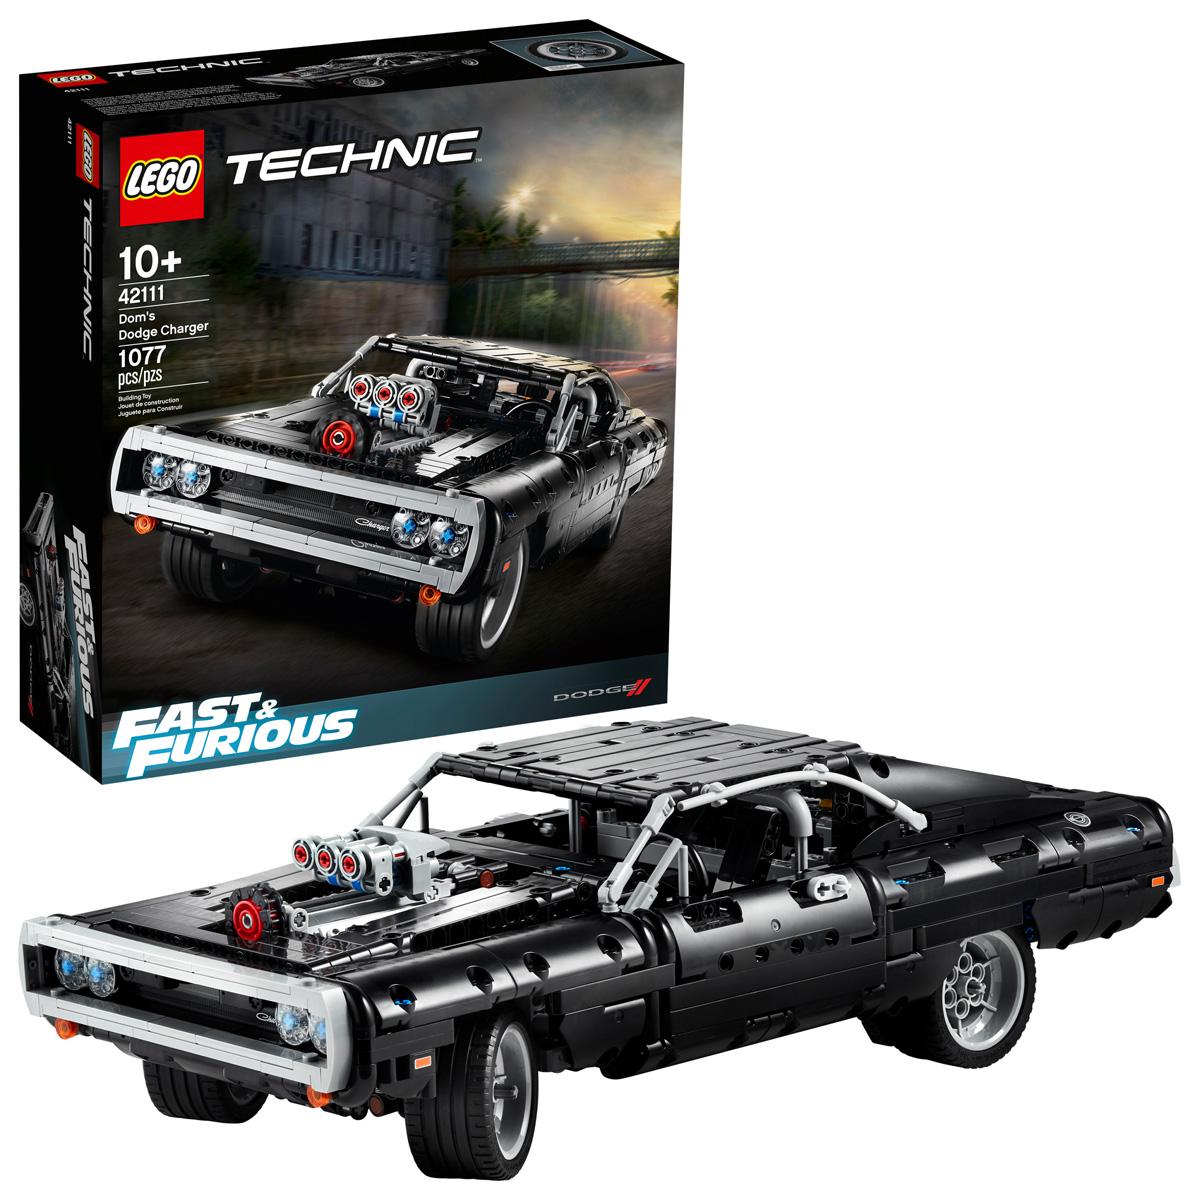 1077-Piece LEGO Technic Fast and Furious Doms Dodge Charger for $80 Shipped